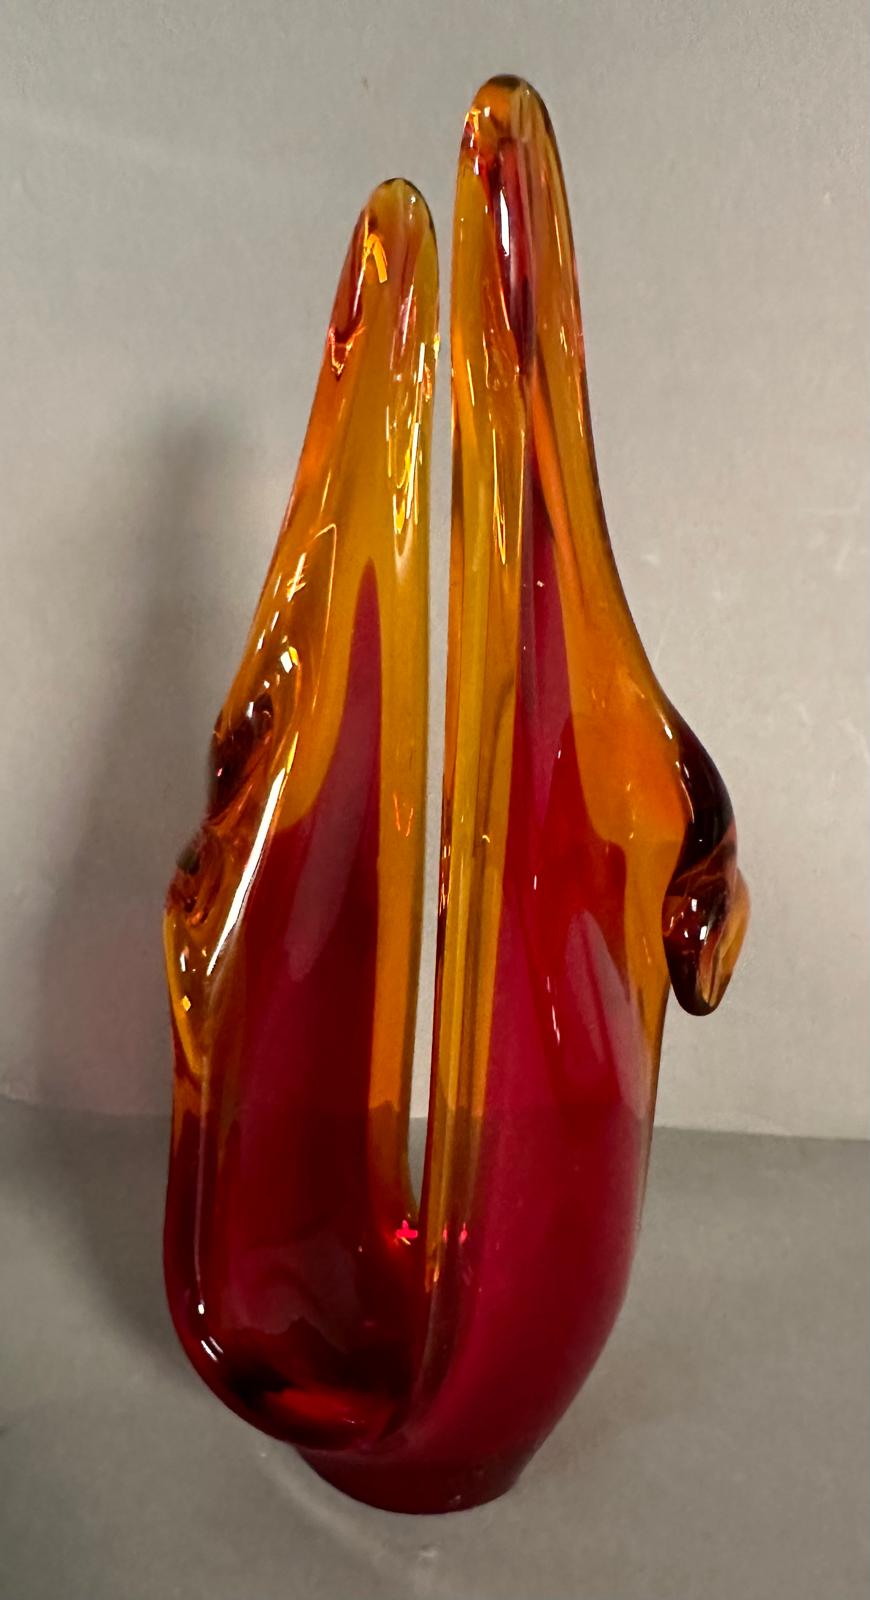 Two contemporary art glass vases in cranberry and yellow - Image 3 of 4